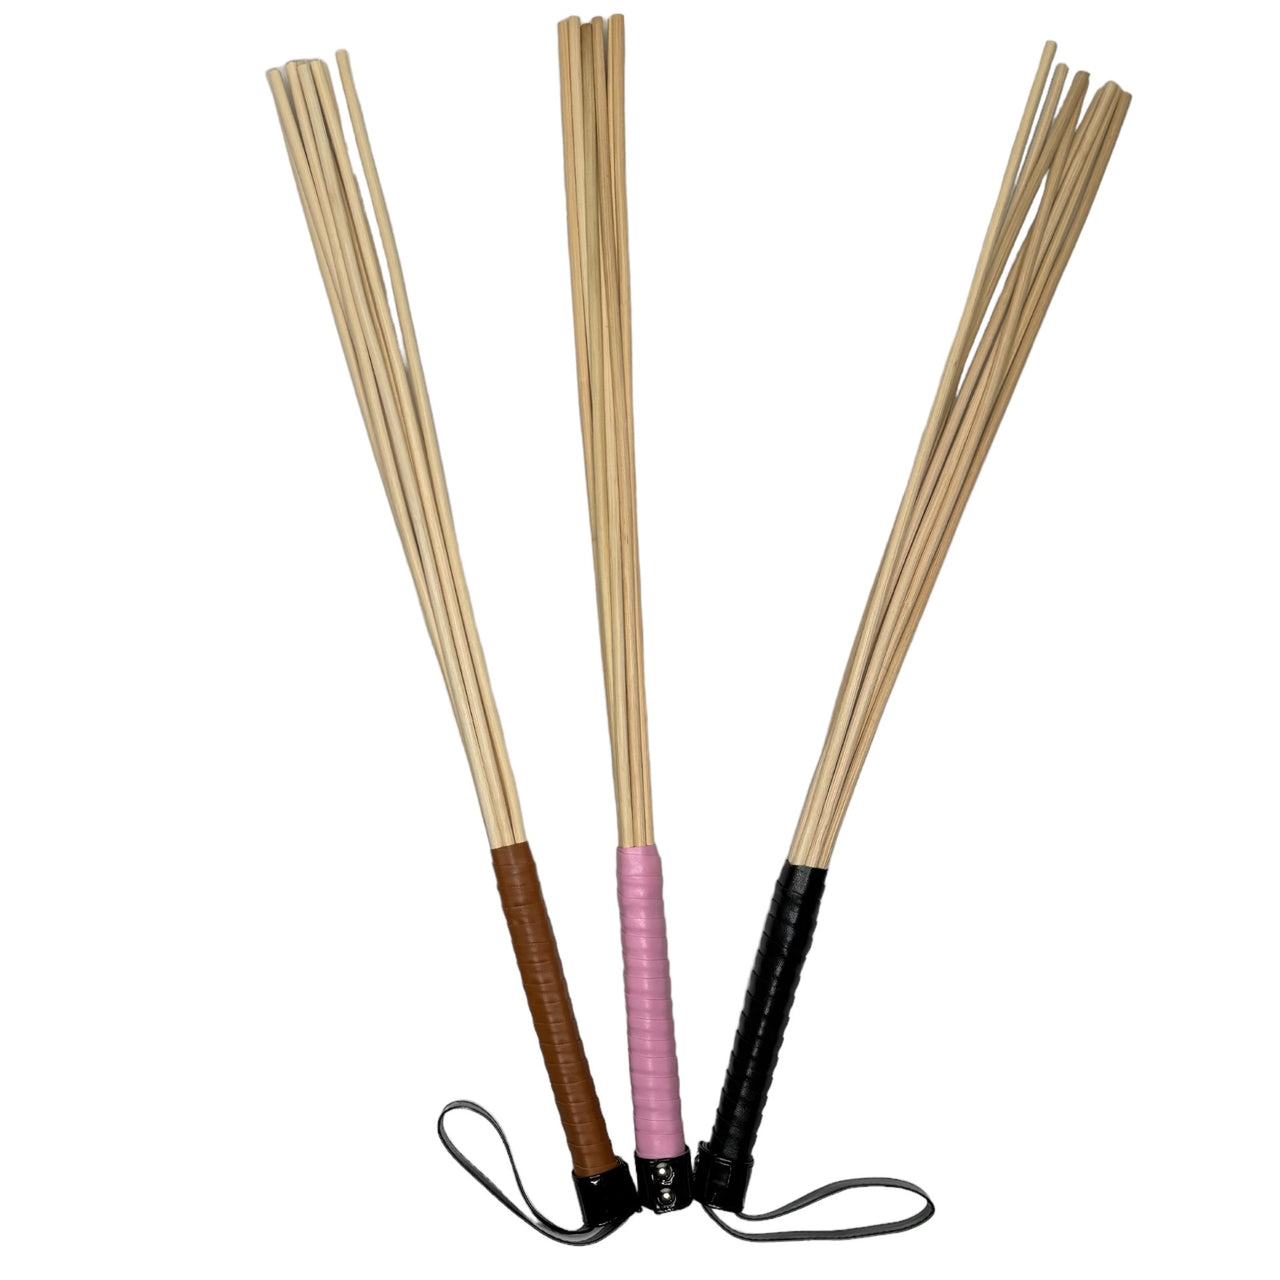 Rattan Cane Bunch Multipurpose Sensory Adult Play Accessory with Natural Flexibility Strength 24"